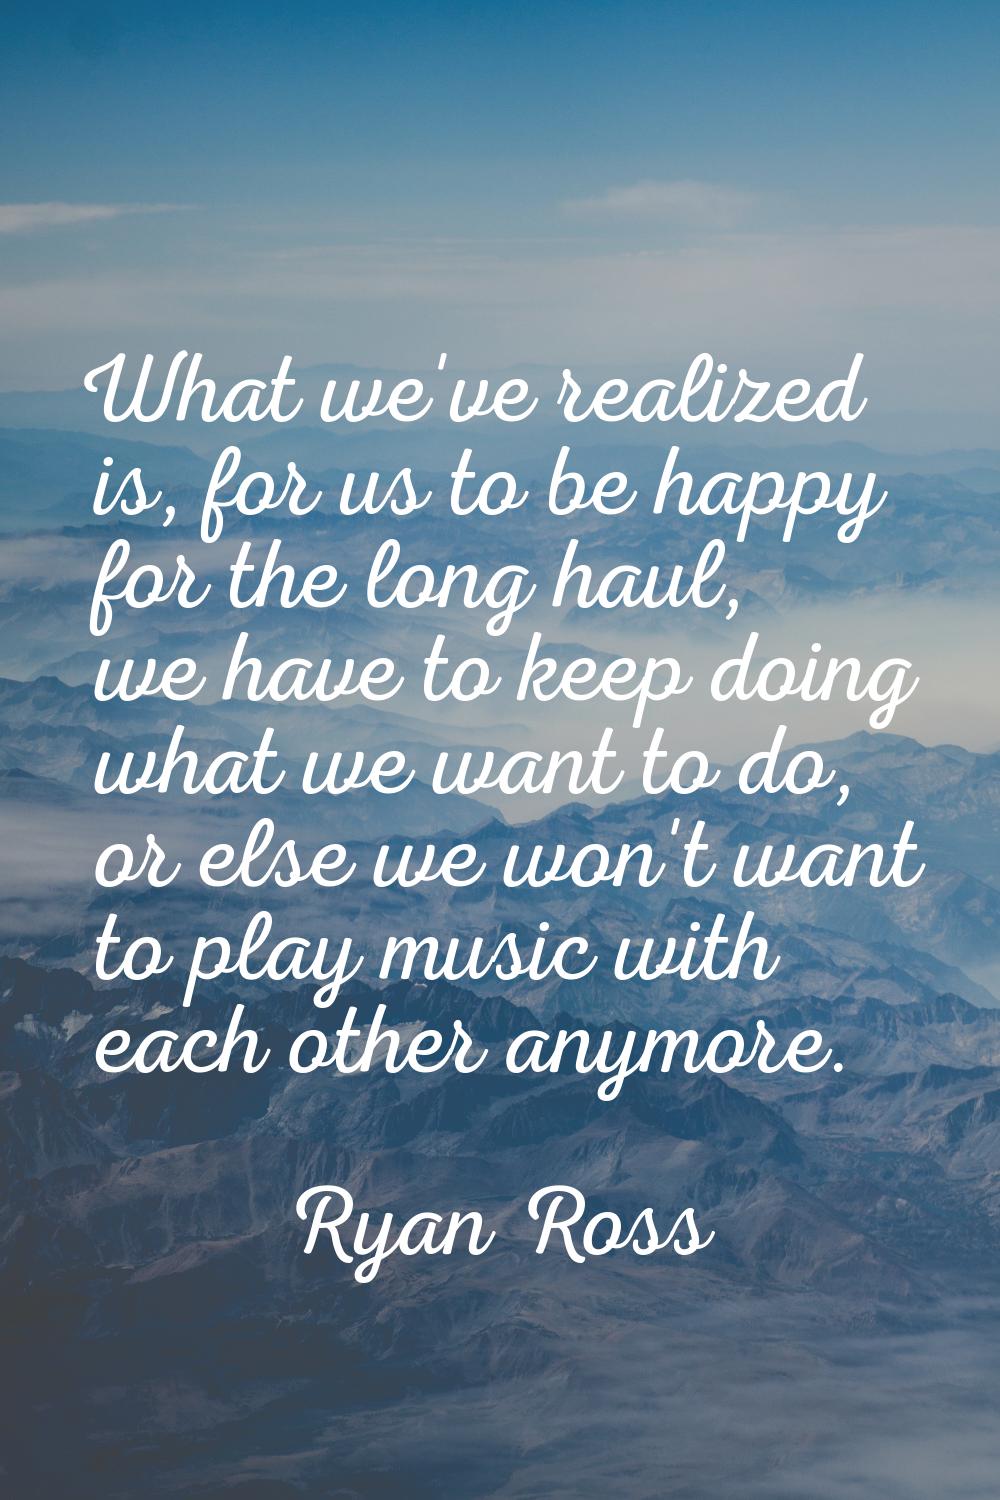 What we've realized is, for us to be happy for the long haul, we have to keep doing what we want to